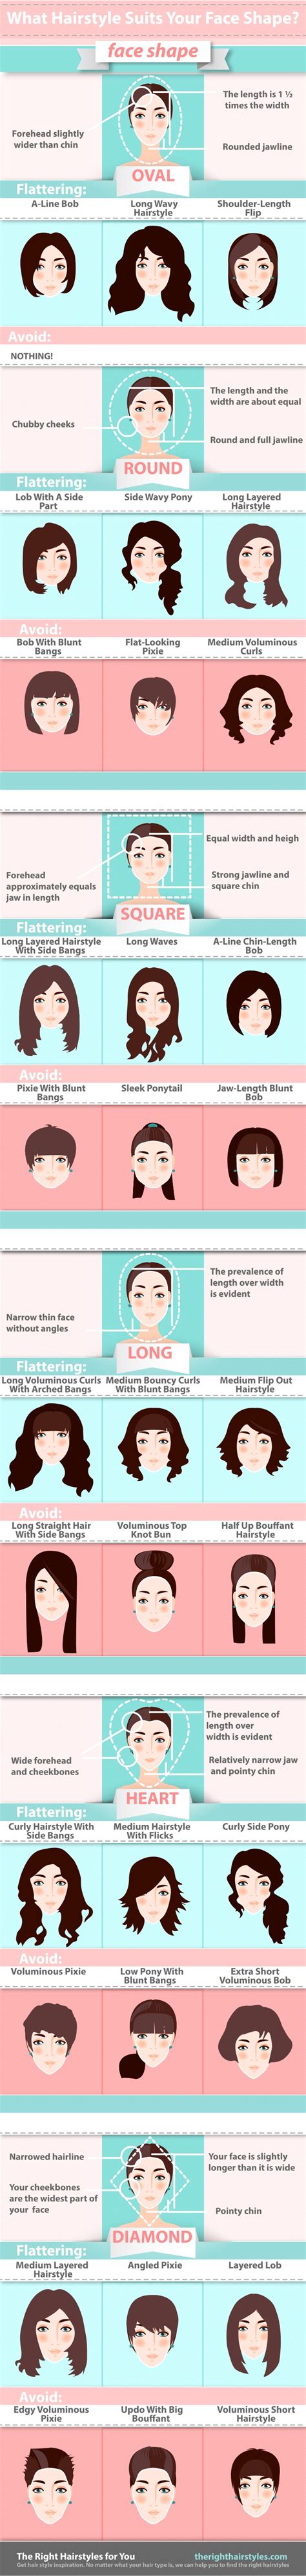 How To Choose A Haircut According To Your Face Shape